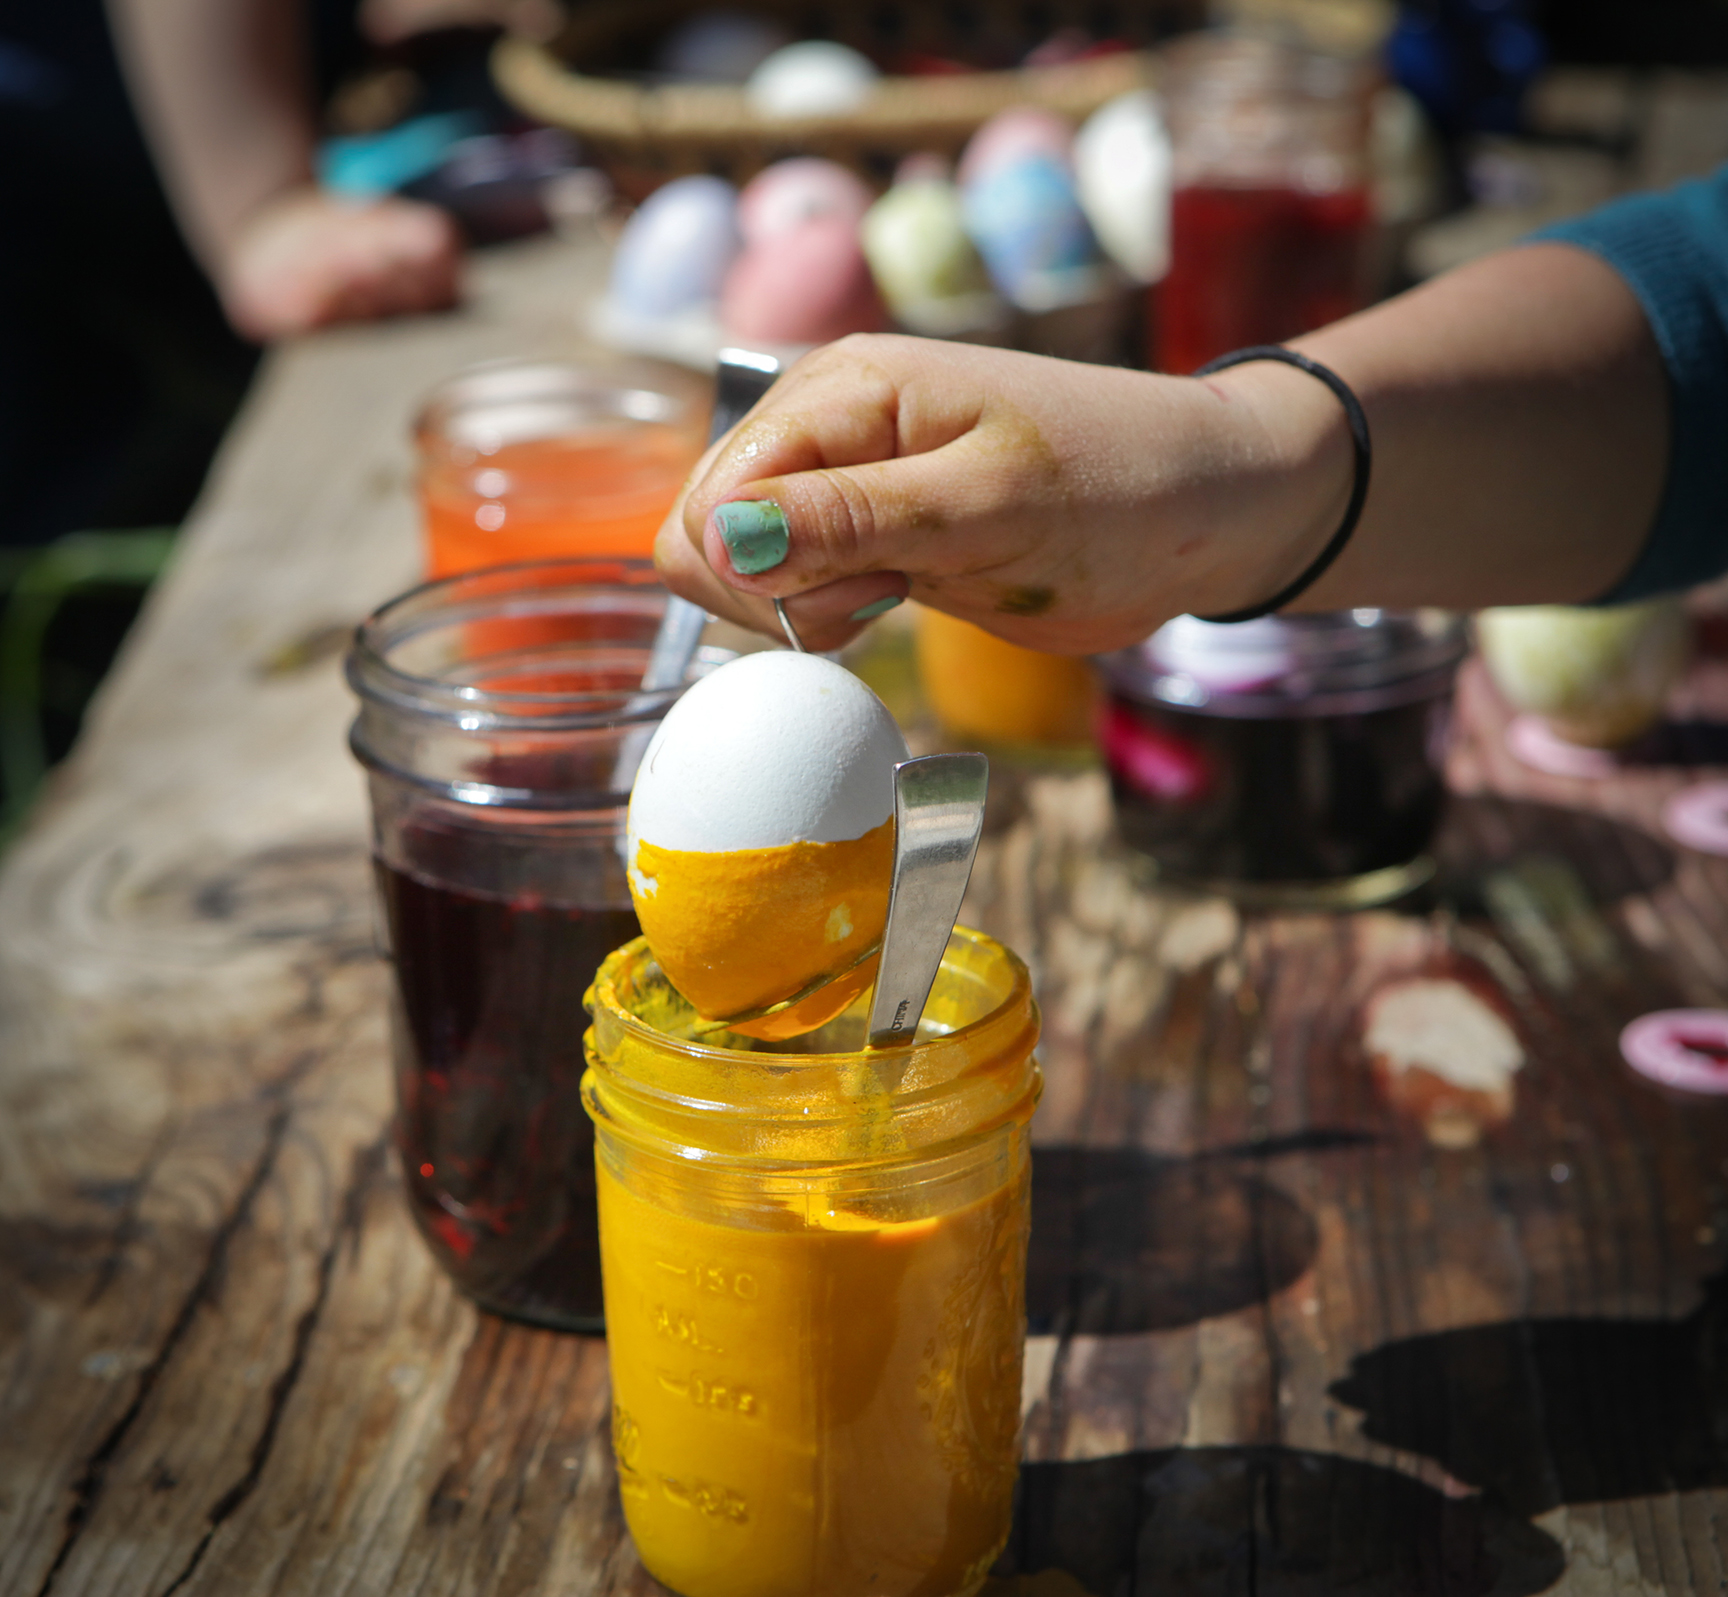 naturally dyed eggs-tumeric-yellow mountainfeed.com